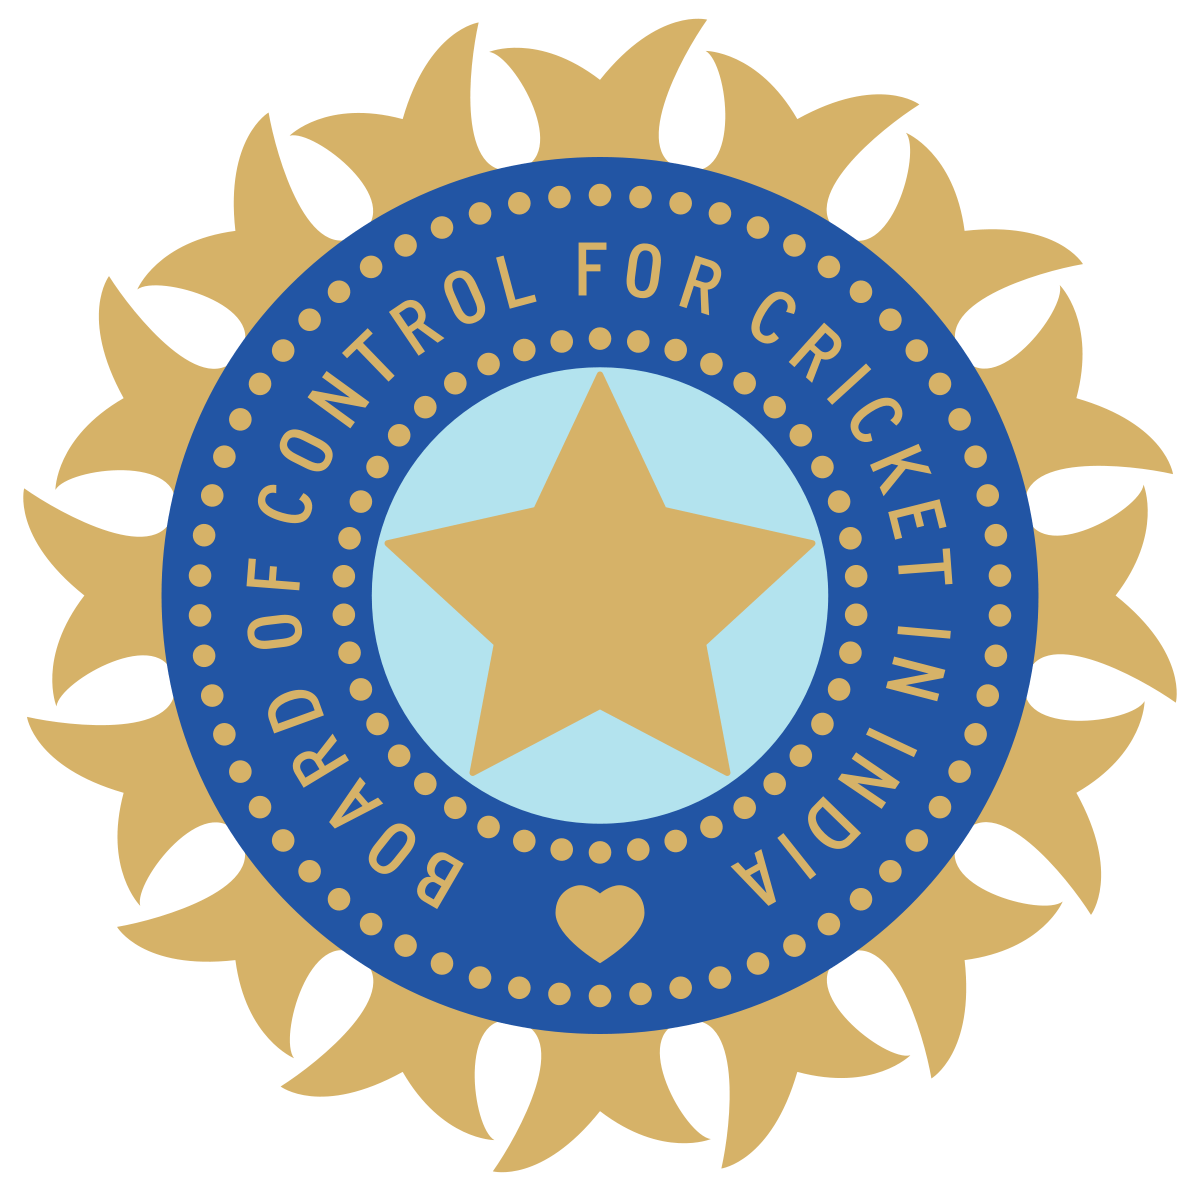 Vice P Logo - Board of Control for Cricket in India